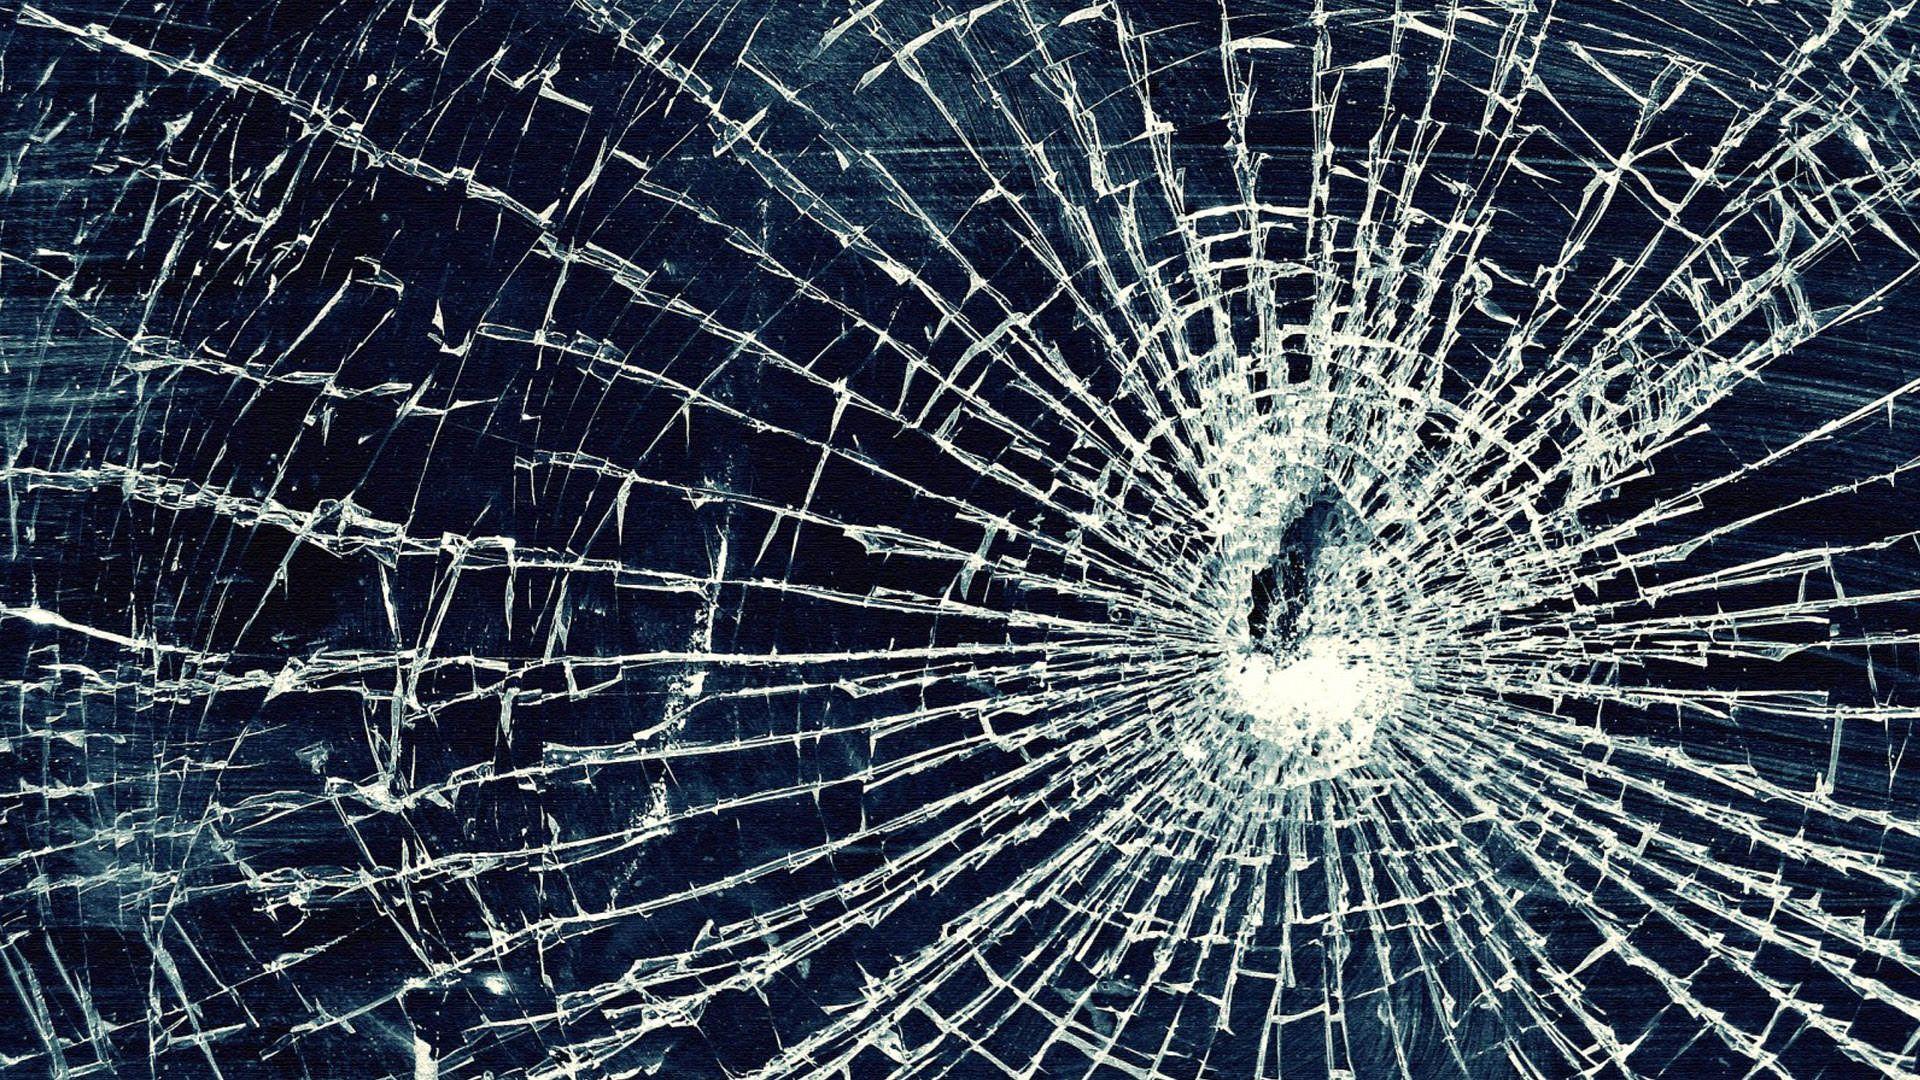 Cracked Screen Wallpaper Free Cracked Screen